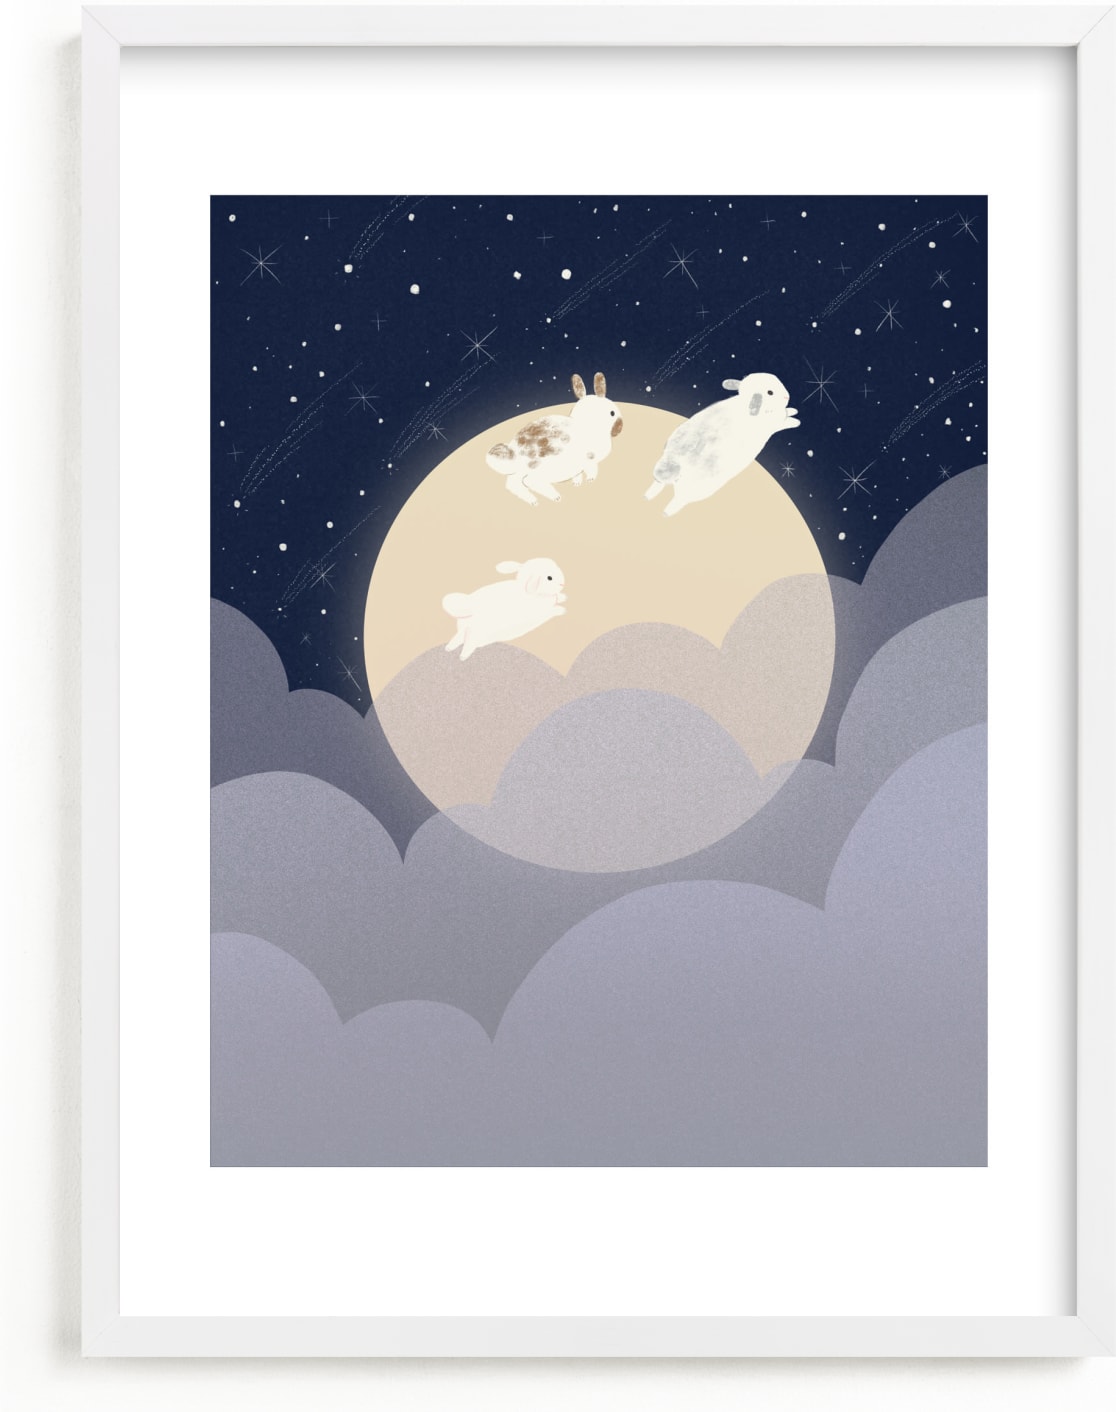 This is a blue nursery wall art by Carol Lin called What We Dream At Night.